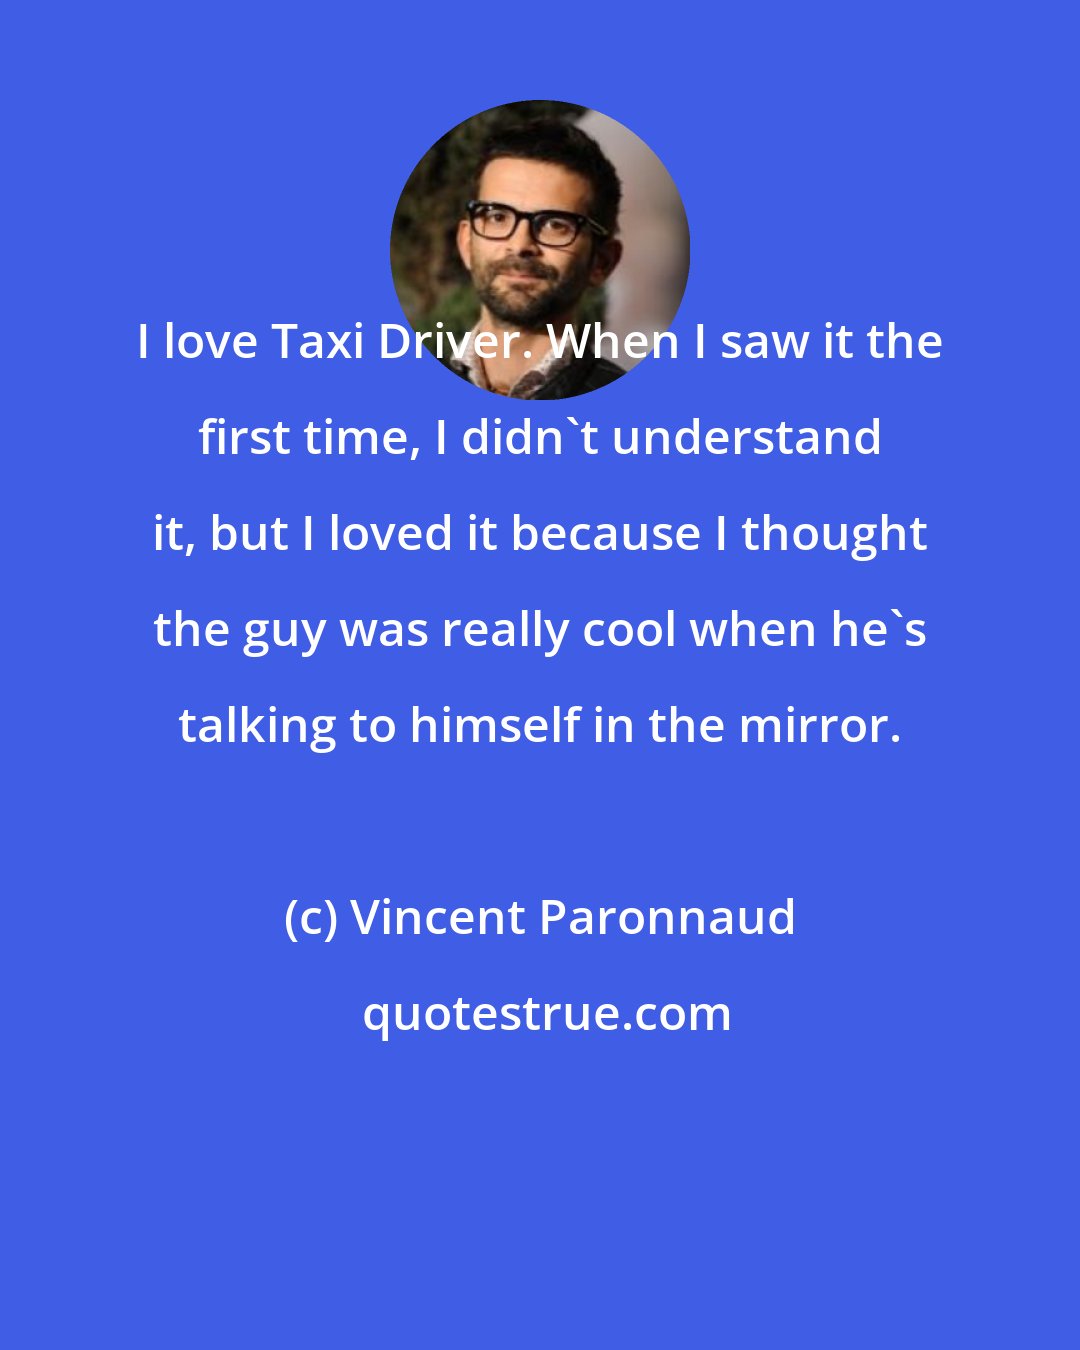 Vincent Paronnaud: I love Taxi Driver. When I saw it the first time, I didn't understand it, but I loved it because I thought the guy was really cool when he's talking to himself in the mirror.